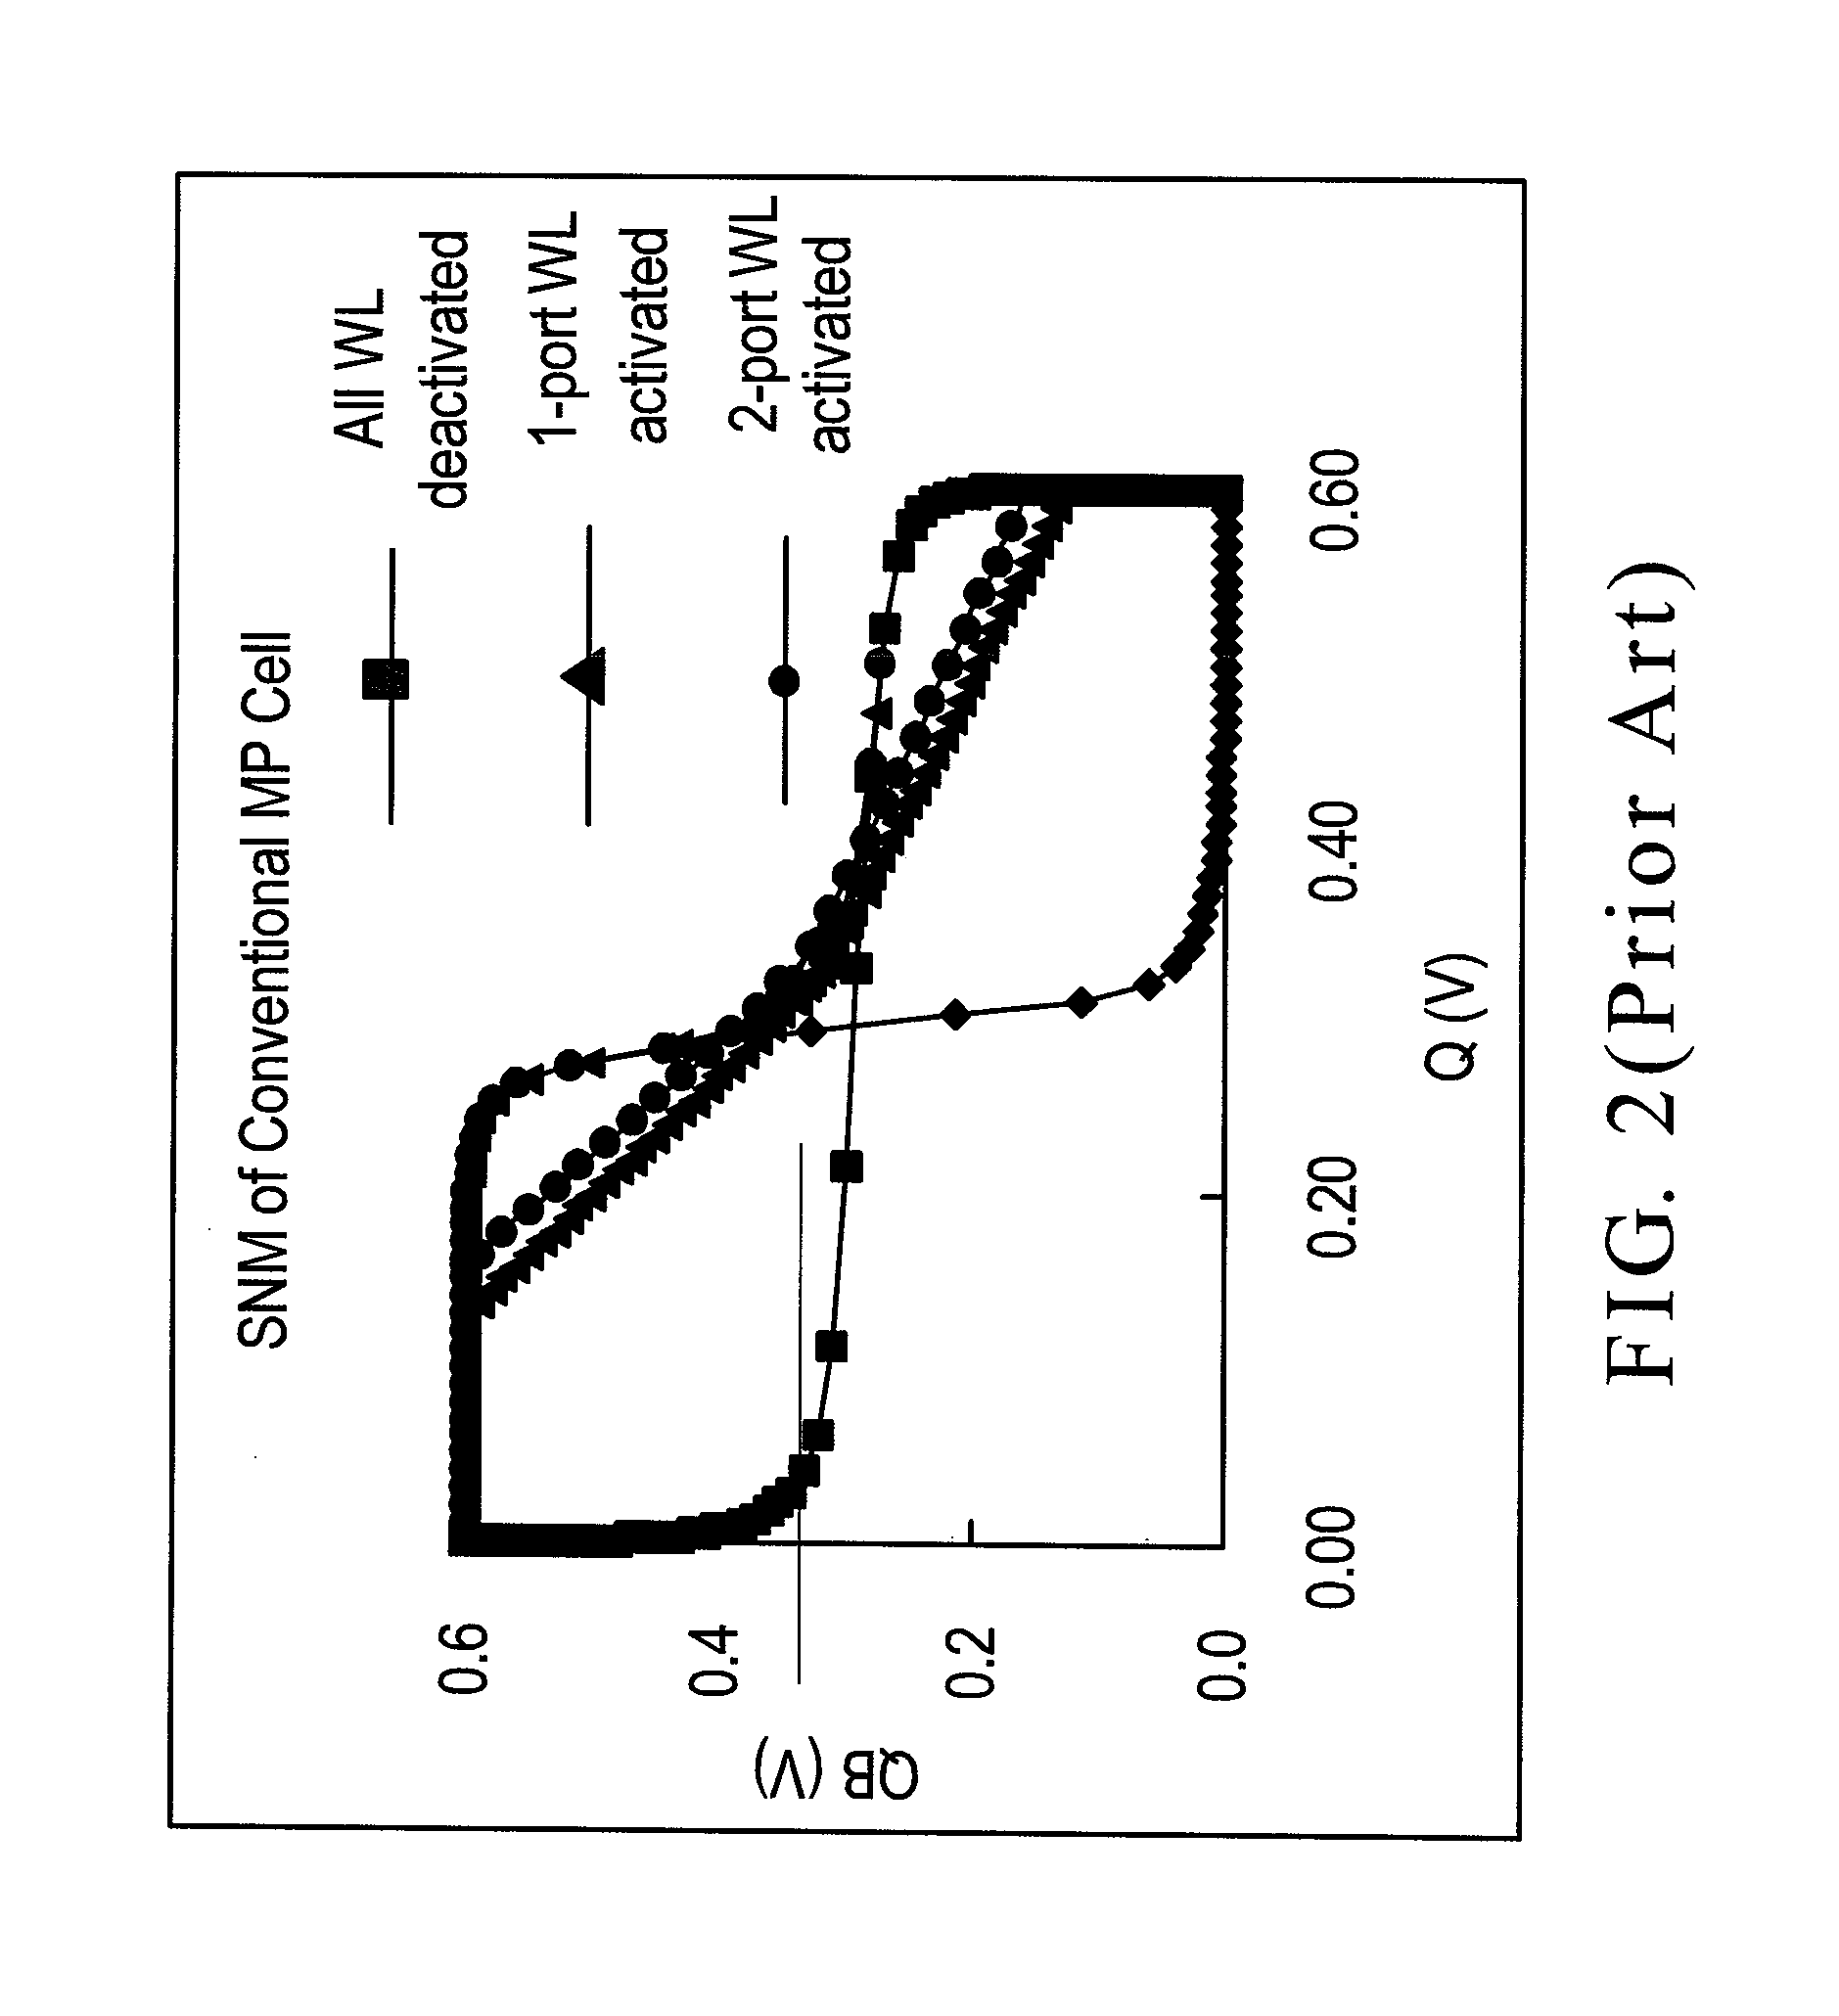 Multi-port SRAM with shared write bit-line architecture and selective read path for low power operation